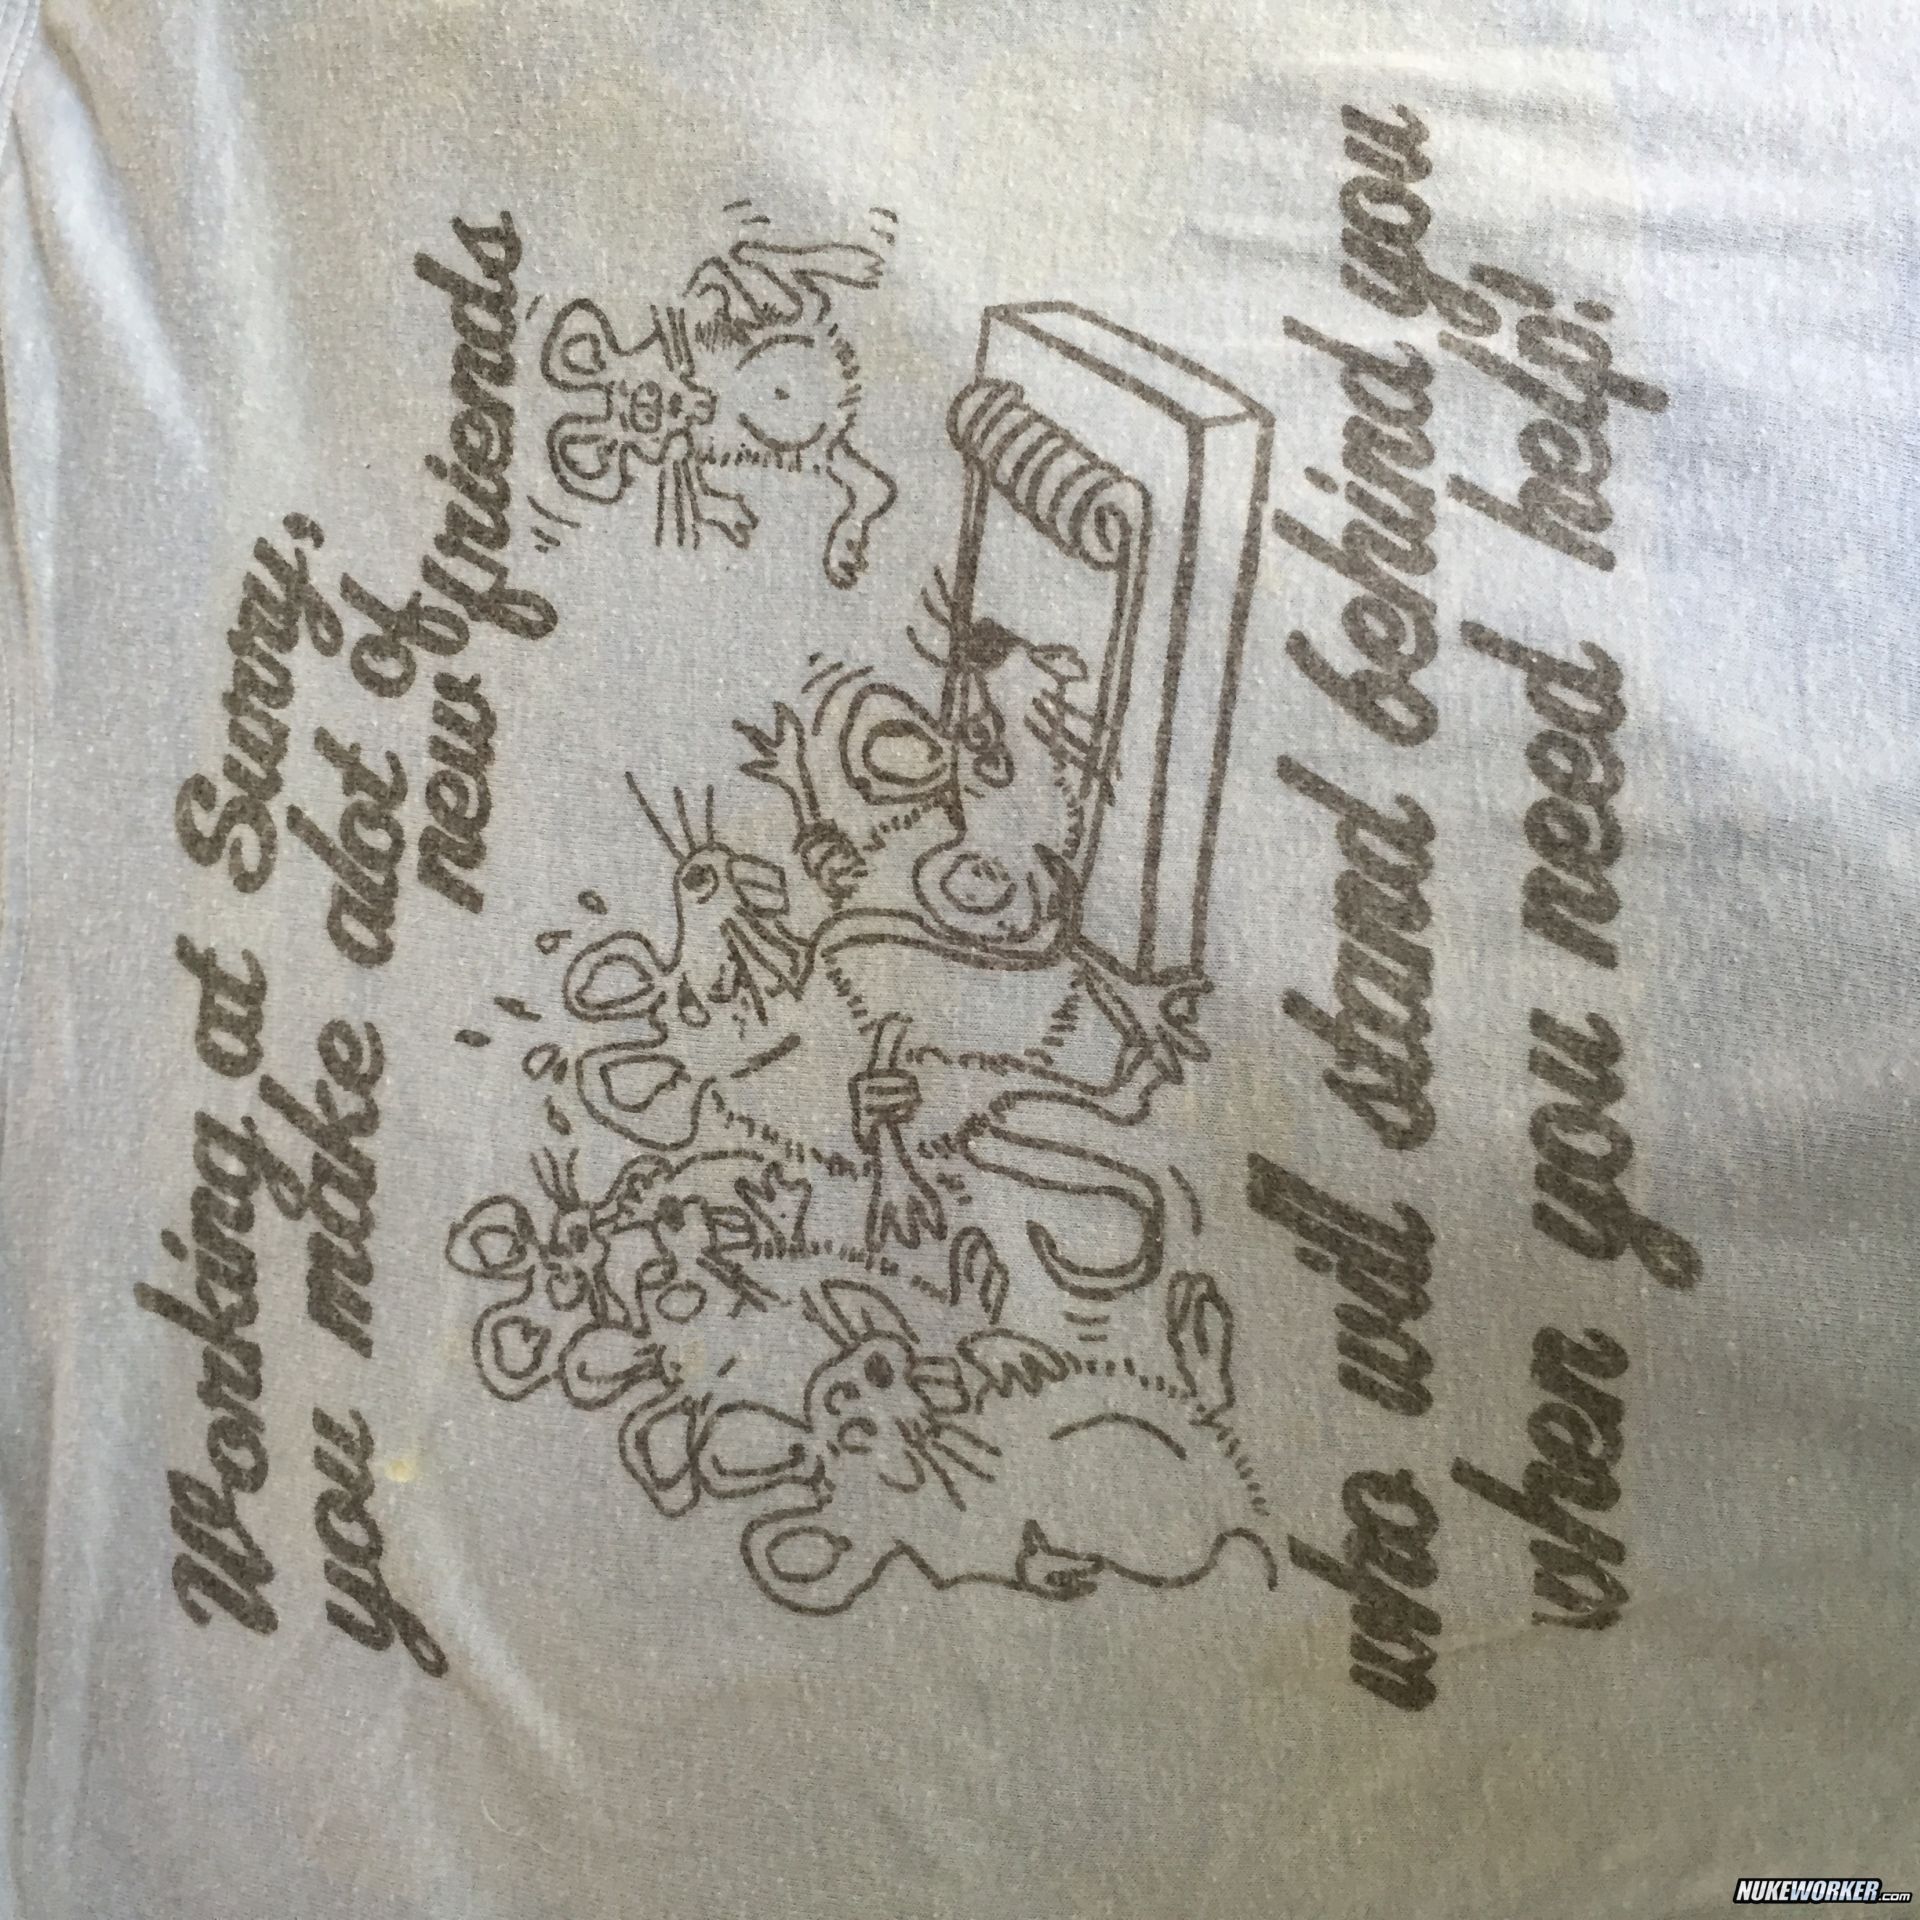 1983 Outage t-shirt
From my outage t-shirt collection
